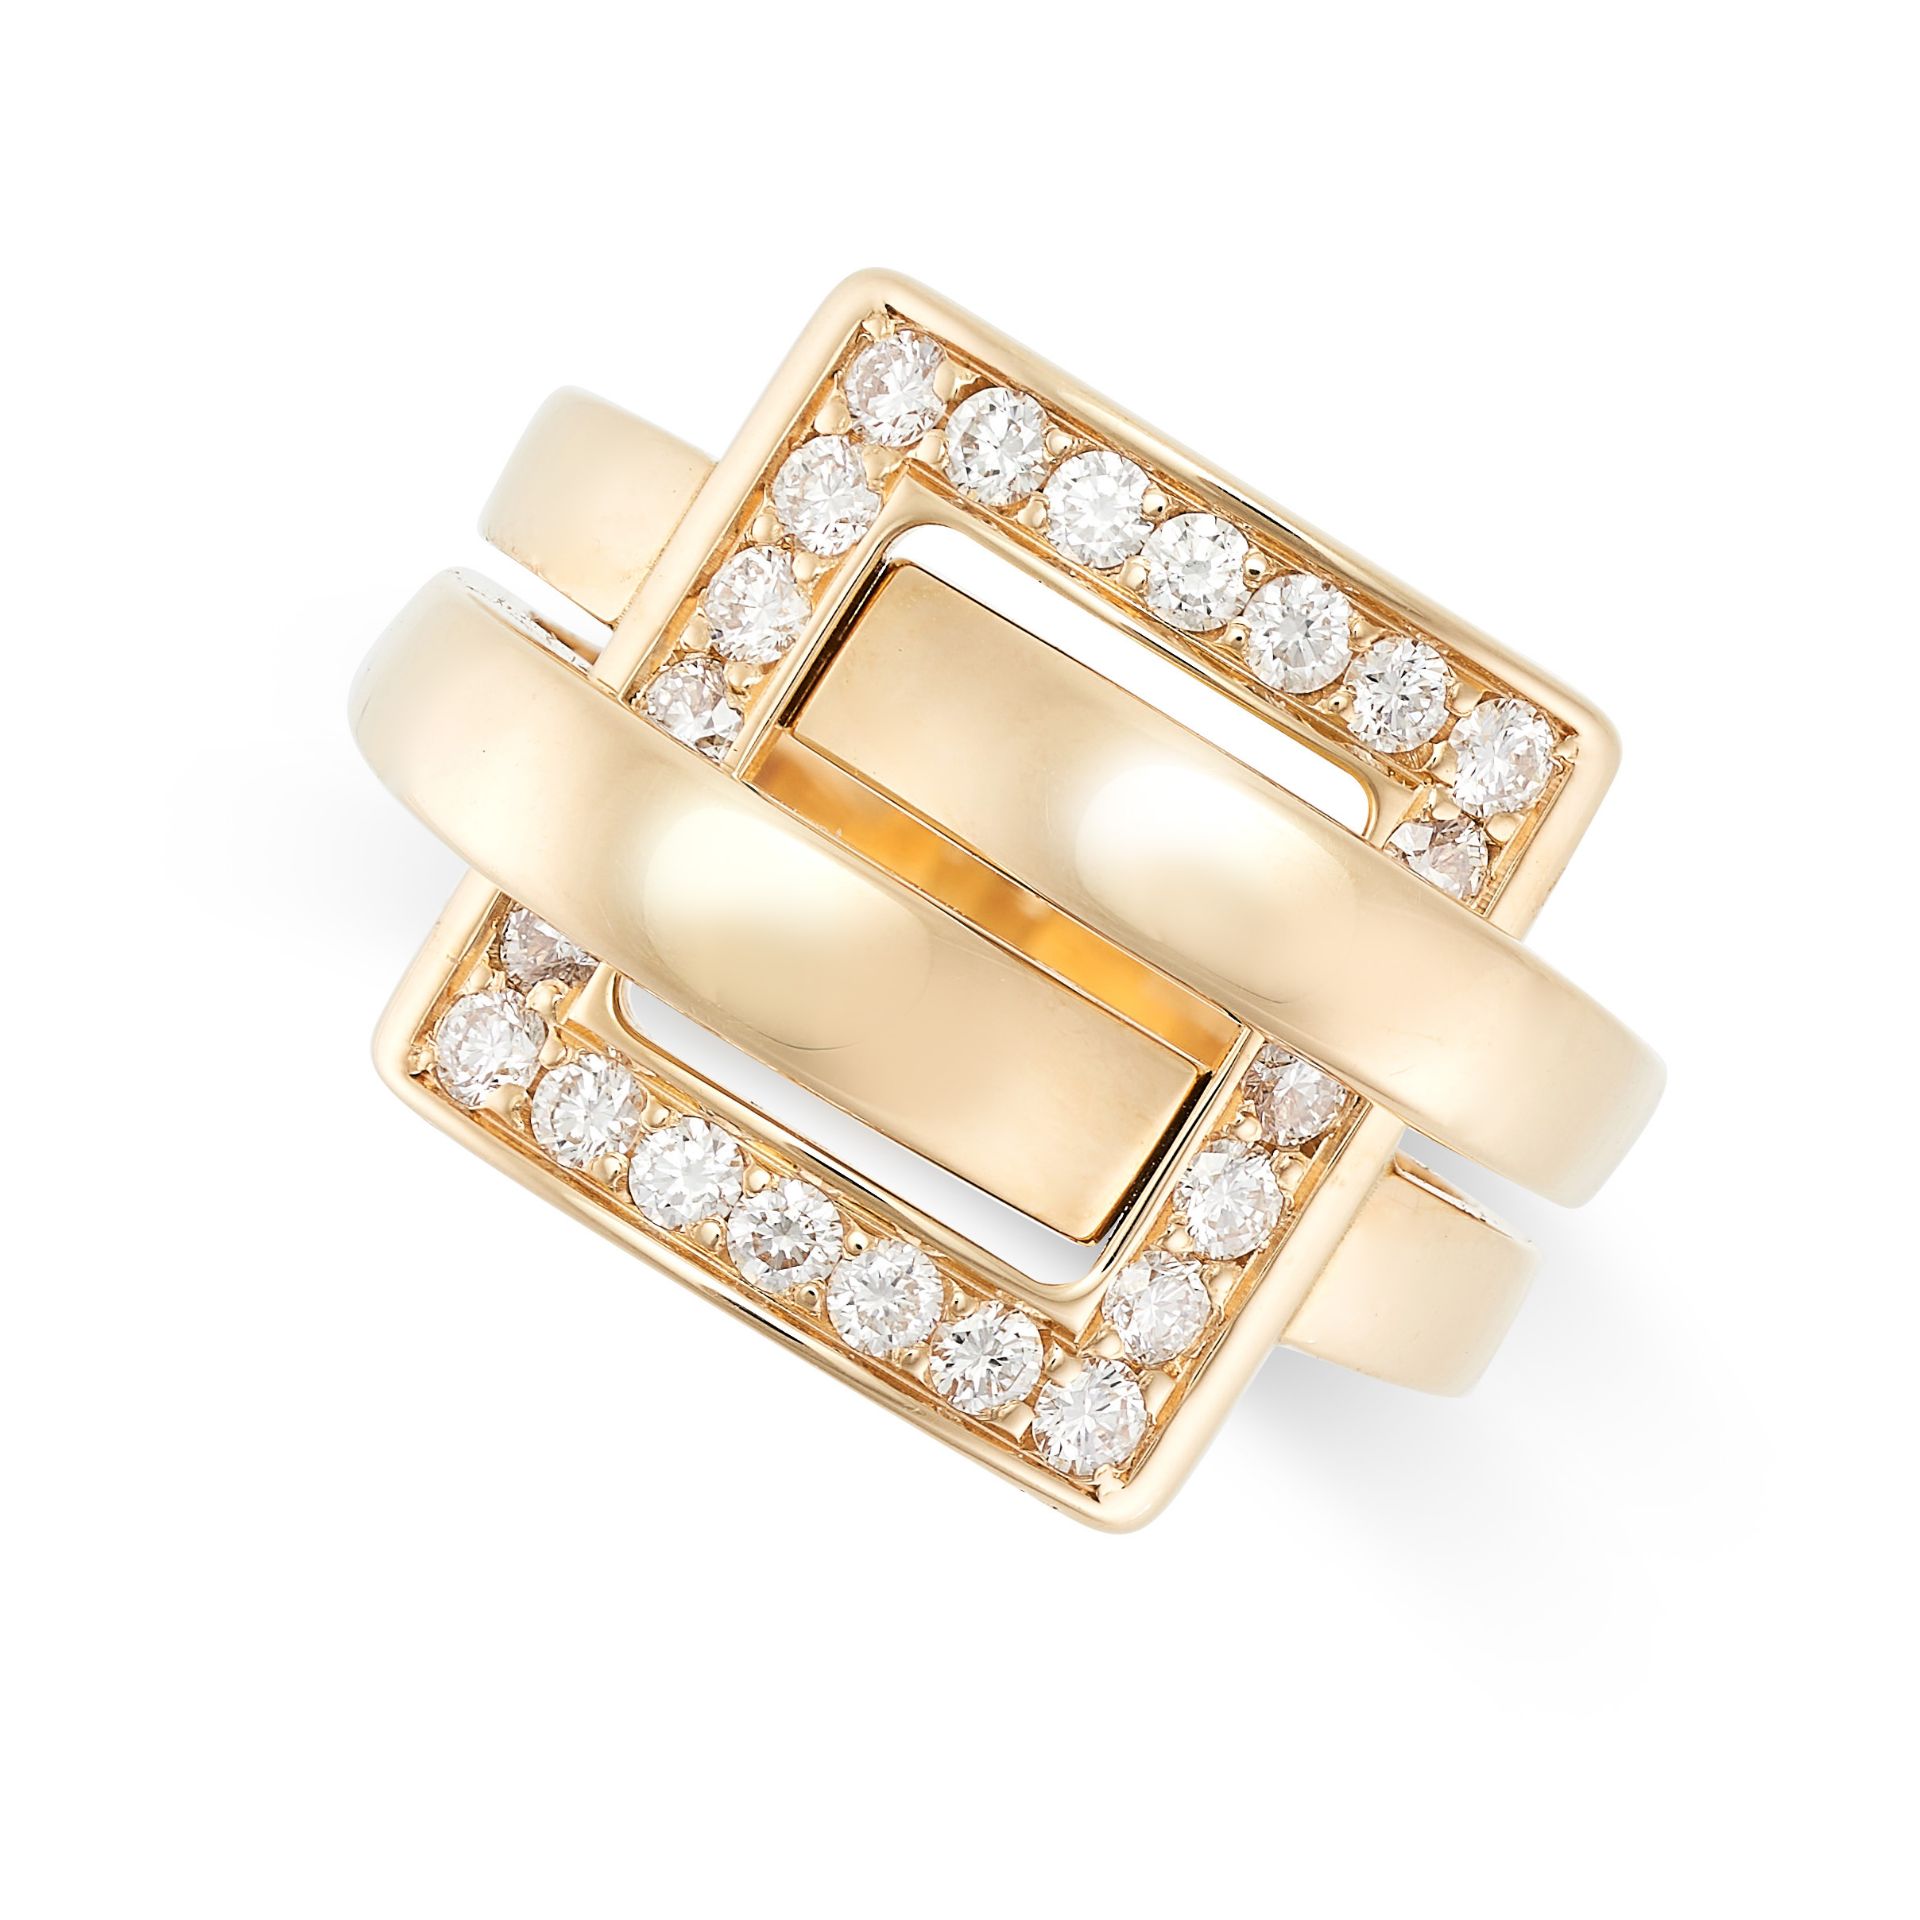 BOUCHERON, A DIAMOND DECHAINEE RING in 18ct yellow gold, designed as a belt buckle, set with round